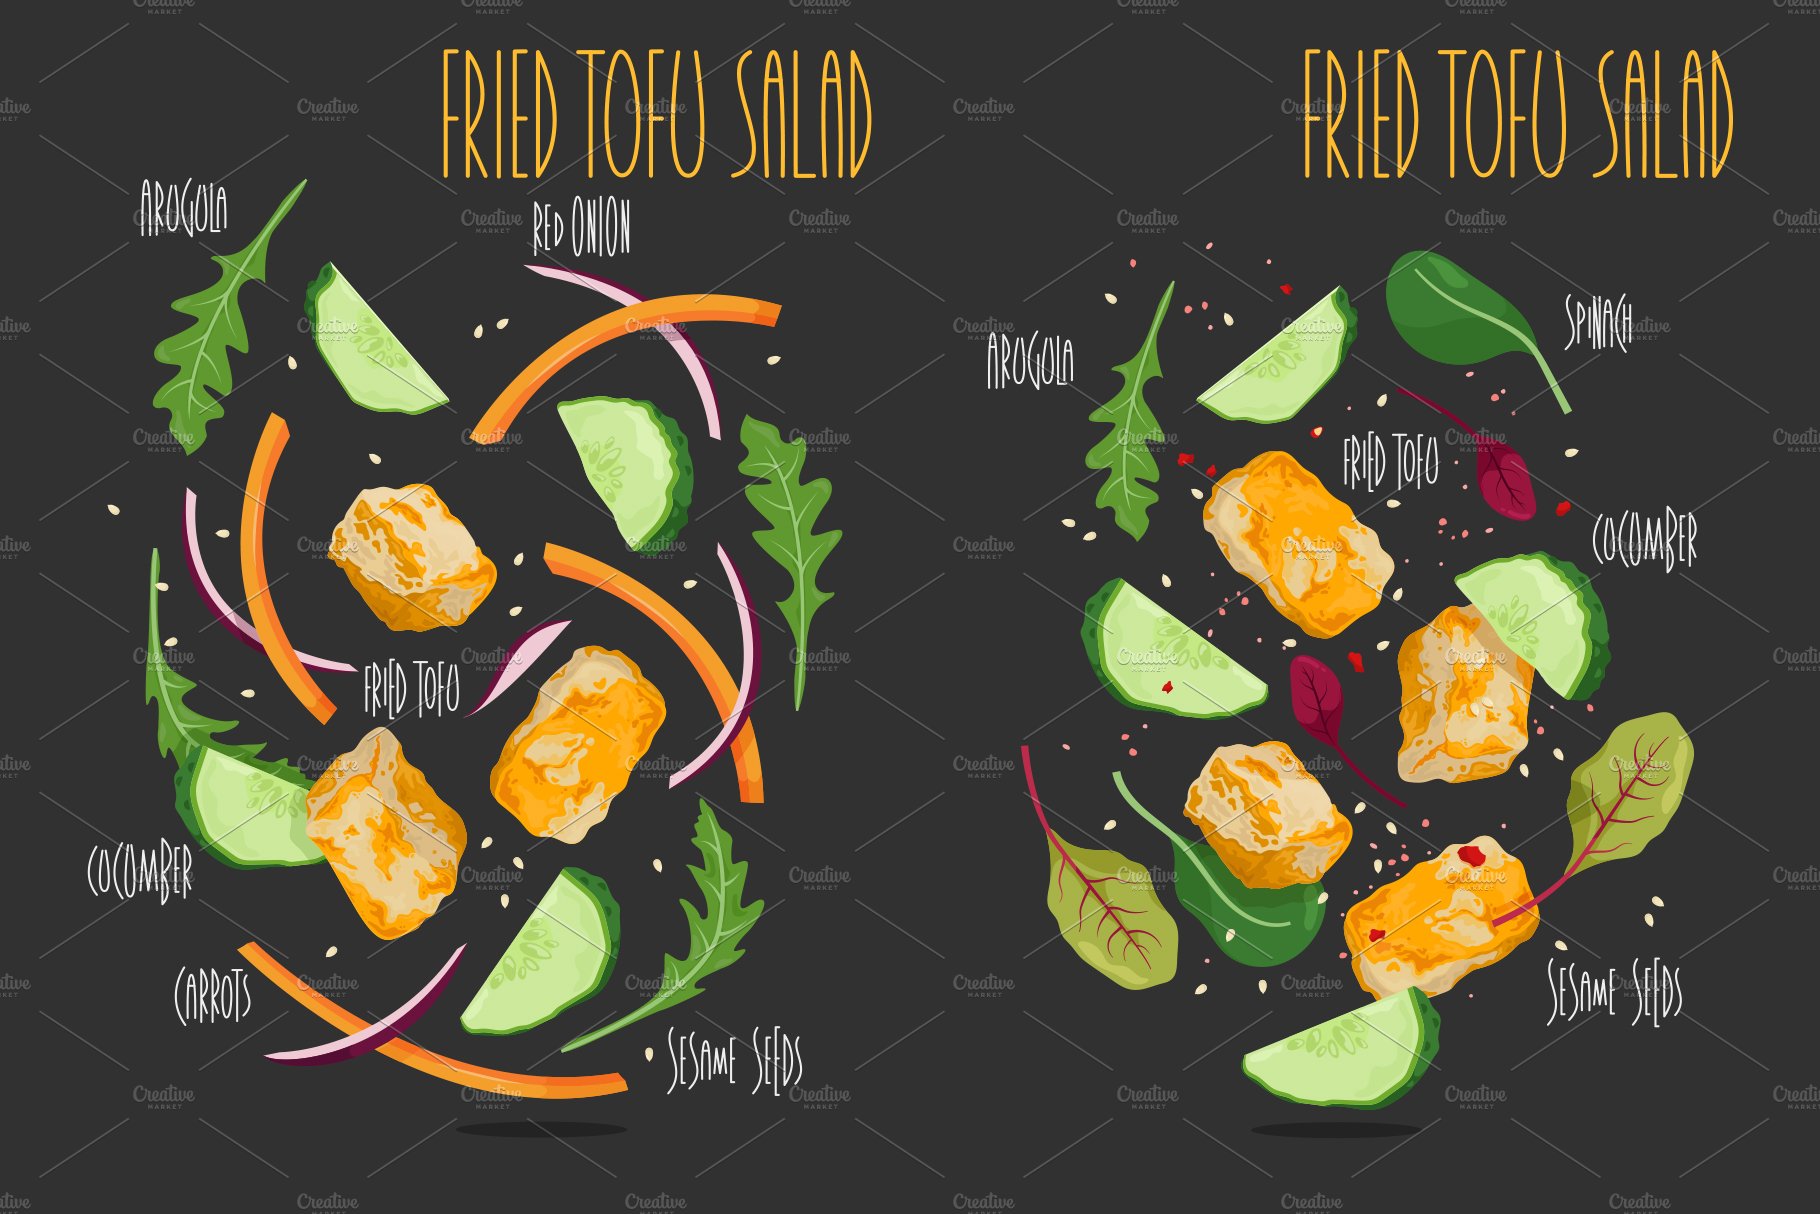 Matte black background with colorful ingredients for your salad.